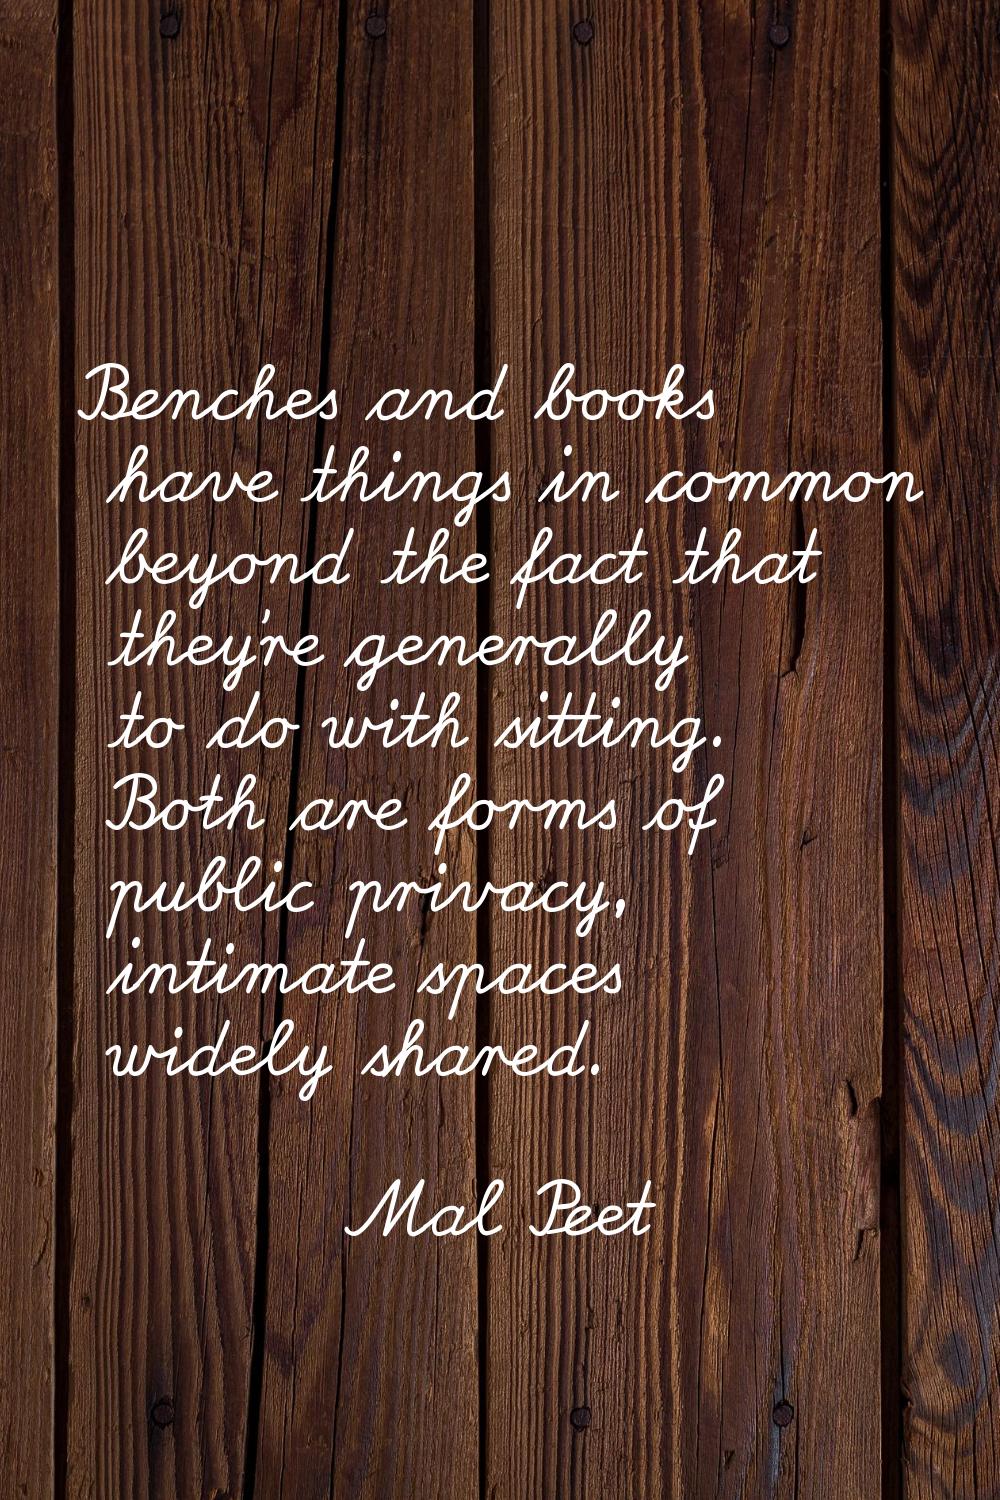 Benches and books have things in common beyond the fact that they're generally to do with sitting. 